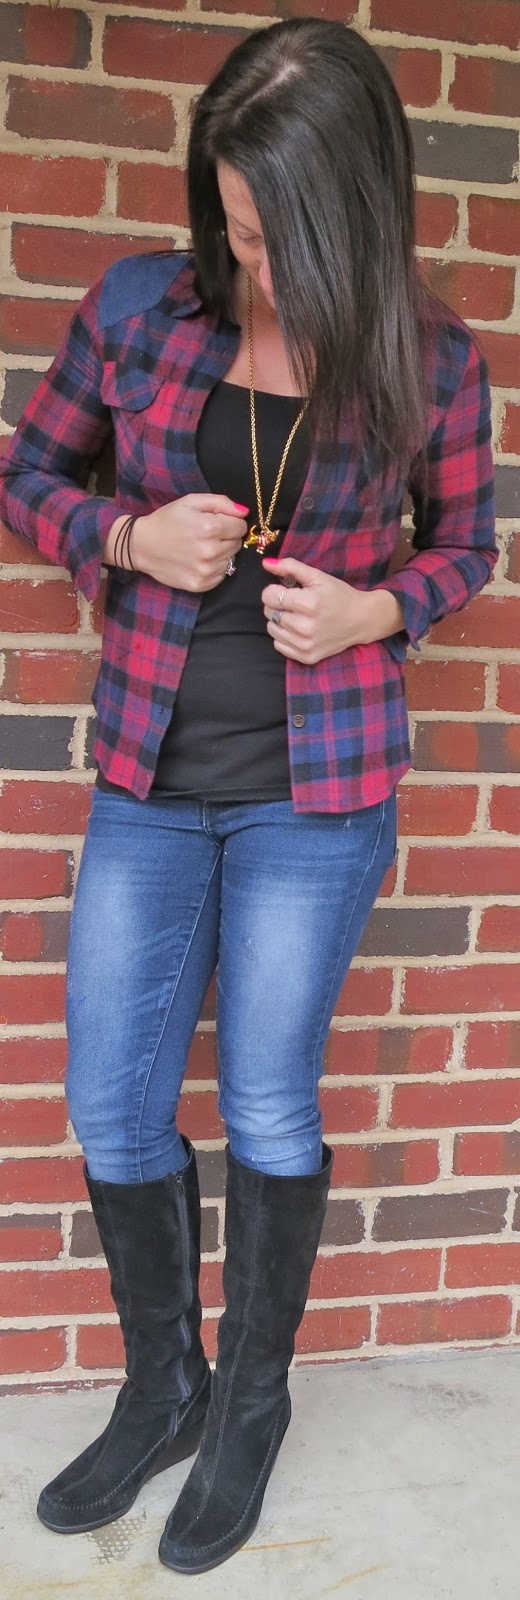 plaid blouse, skinny jeans, flannel, outfit, fashion